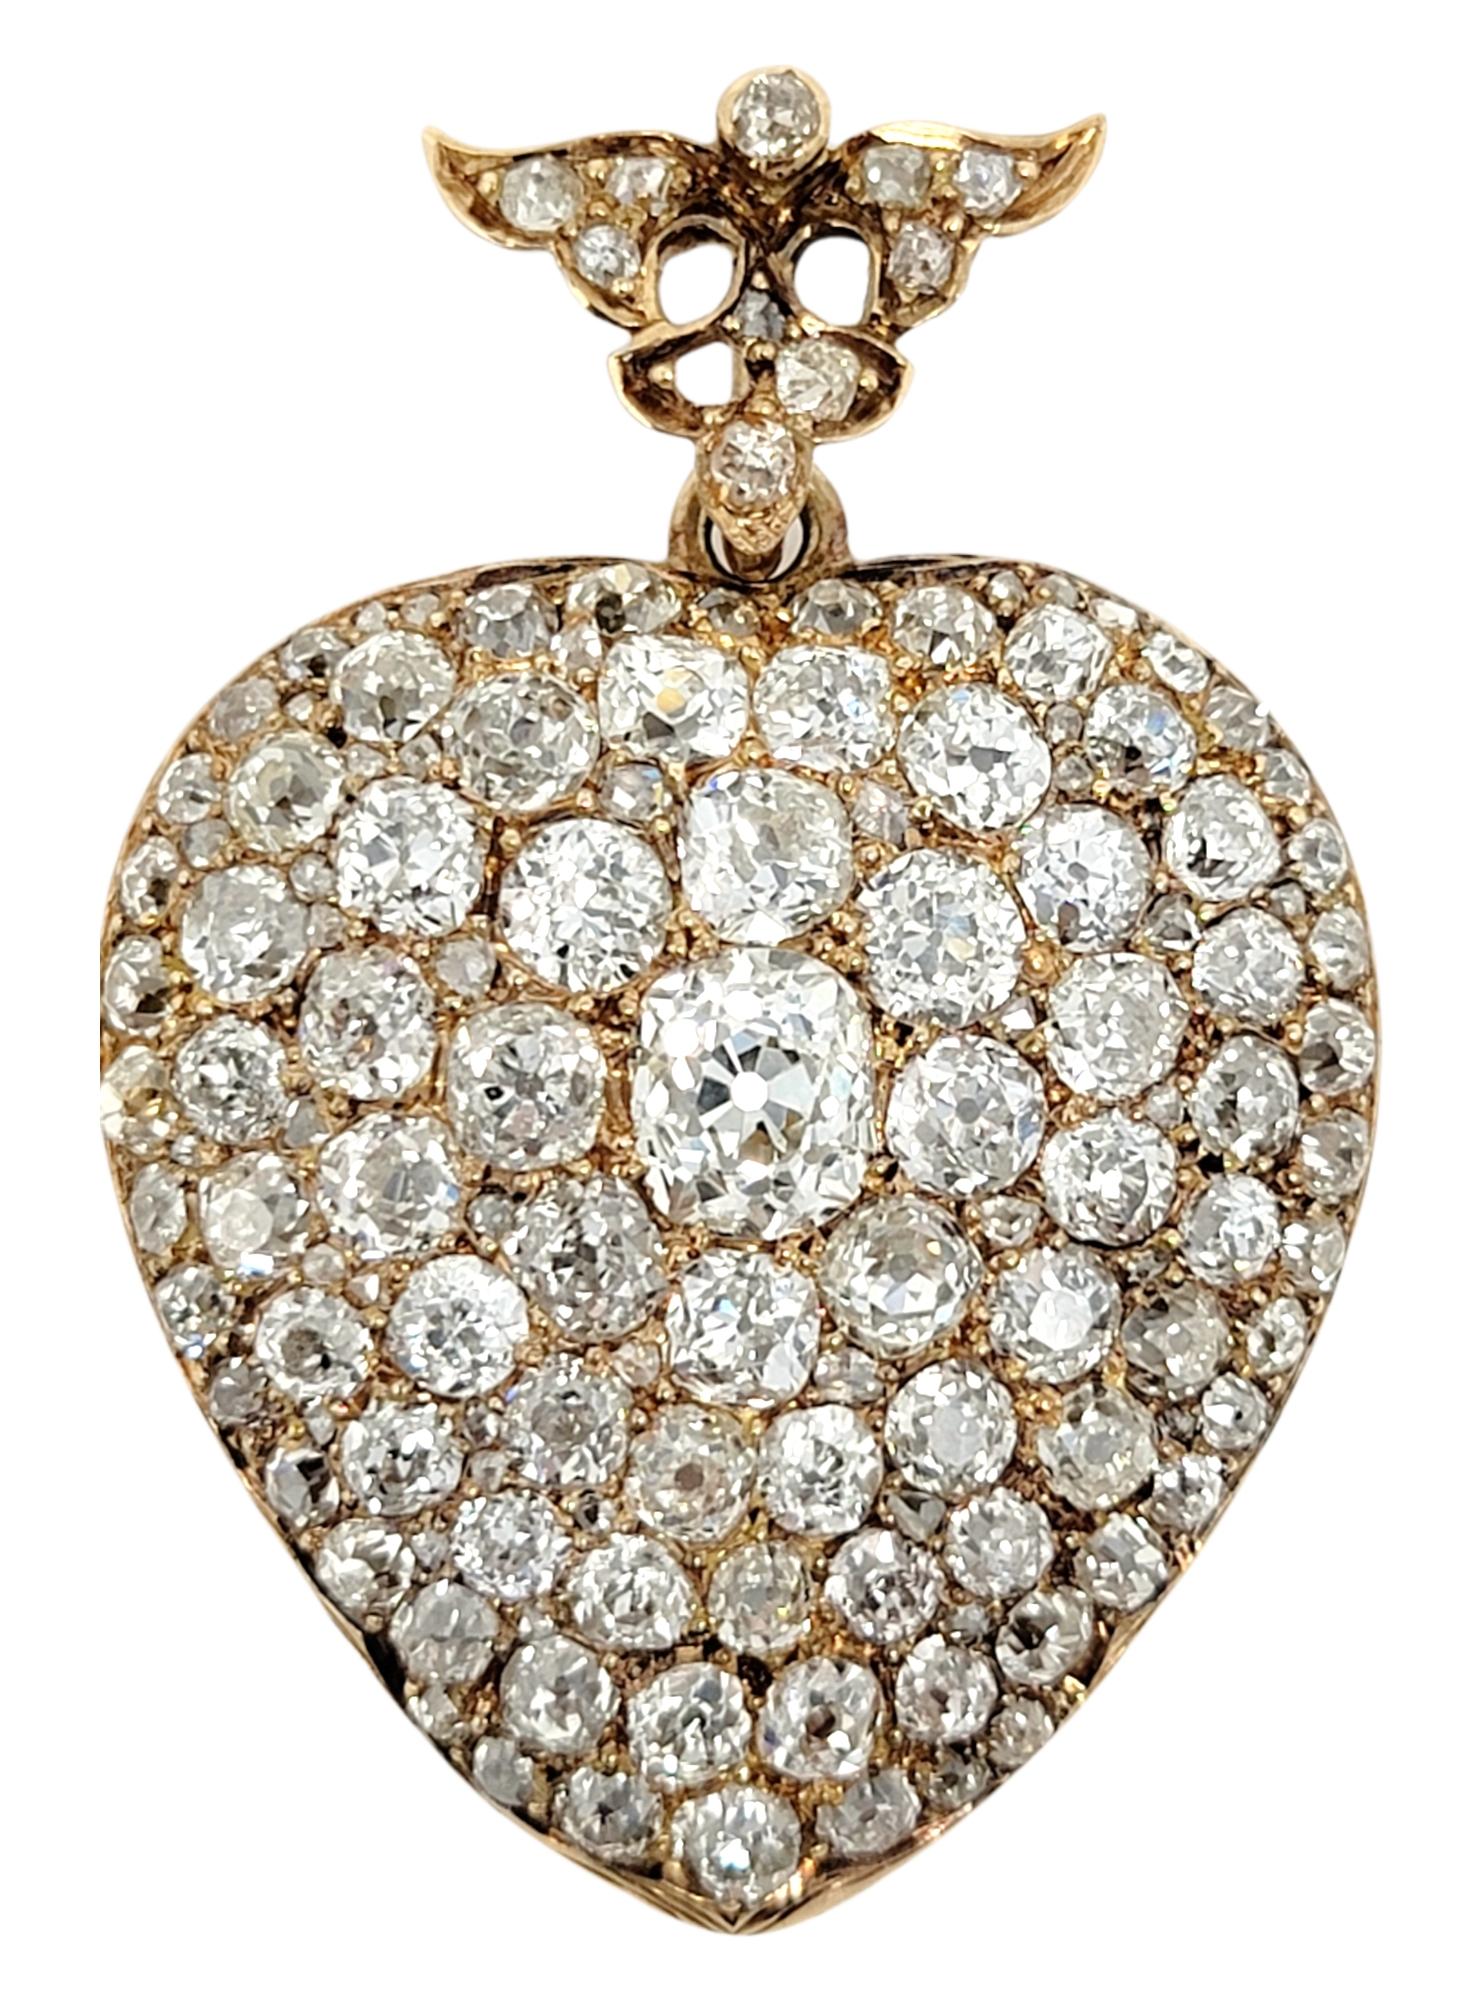 Absolutely exquisite antique heart pendant/locket combo embellished with stunning Old Mine and Old European cut natural diamonds in varying sizes. The glittering white diamonds really pop against the yellow gold, while the slightly rounded layout of